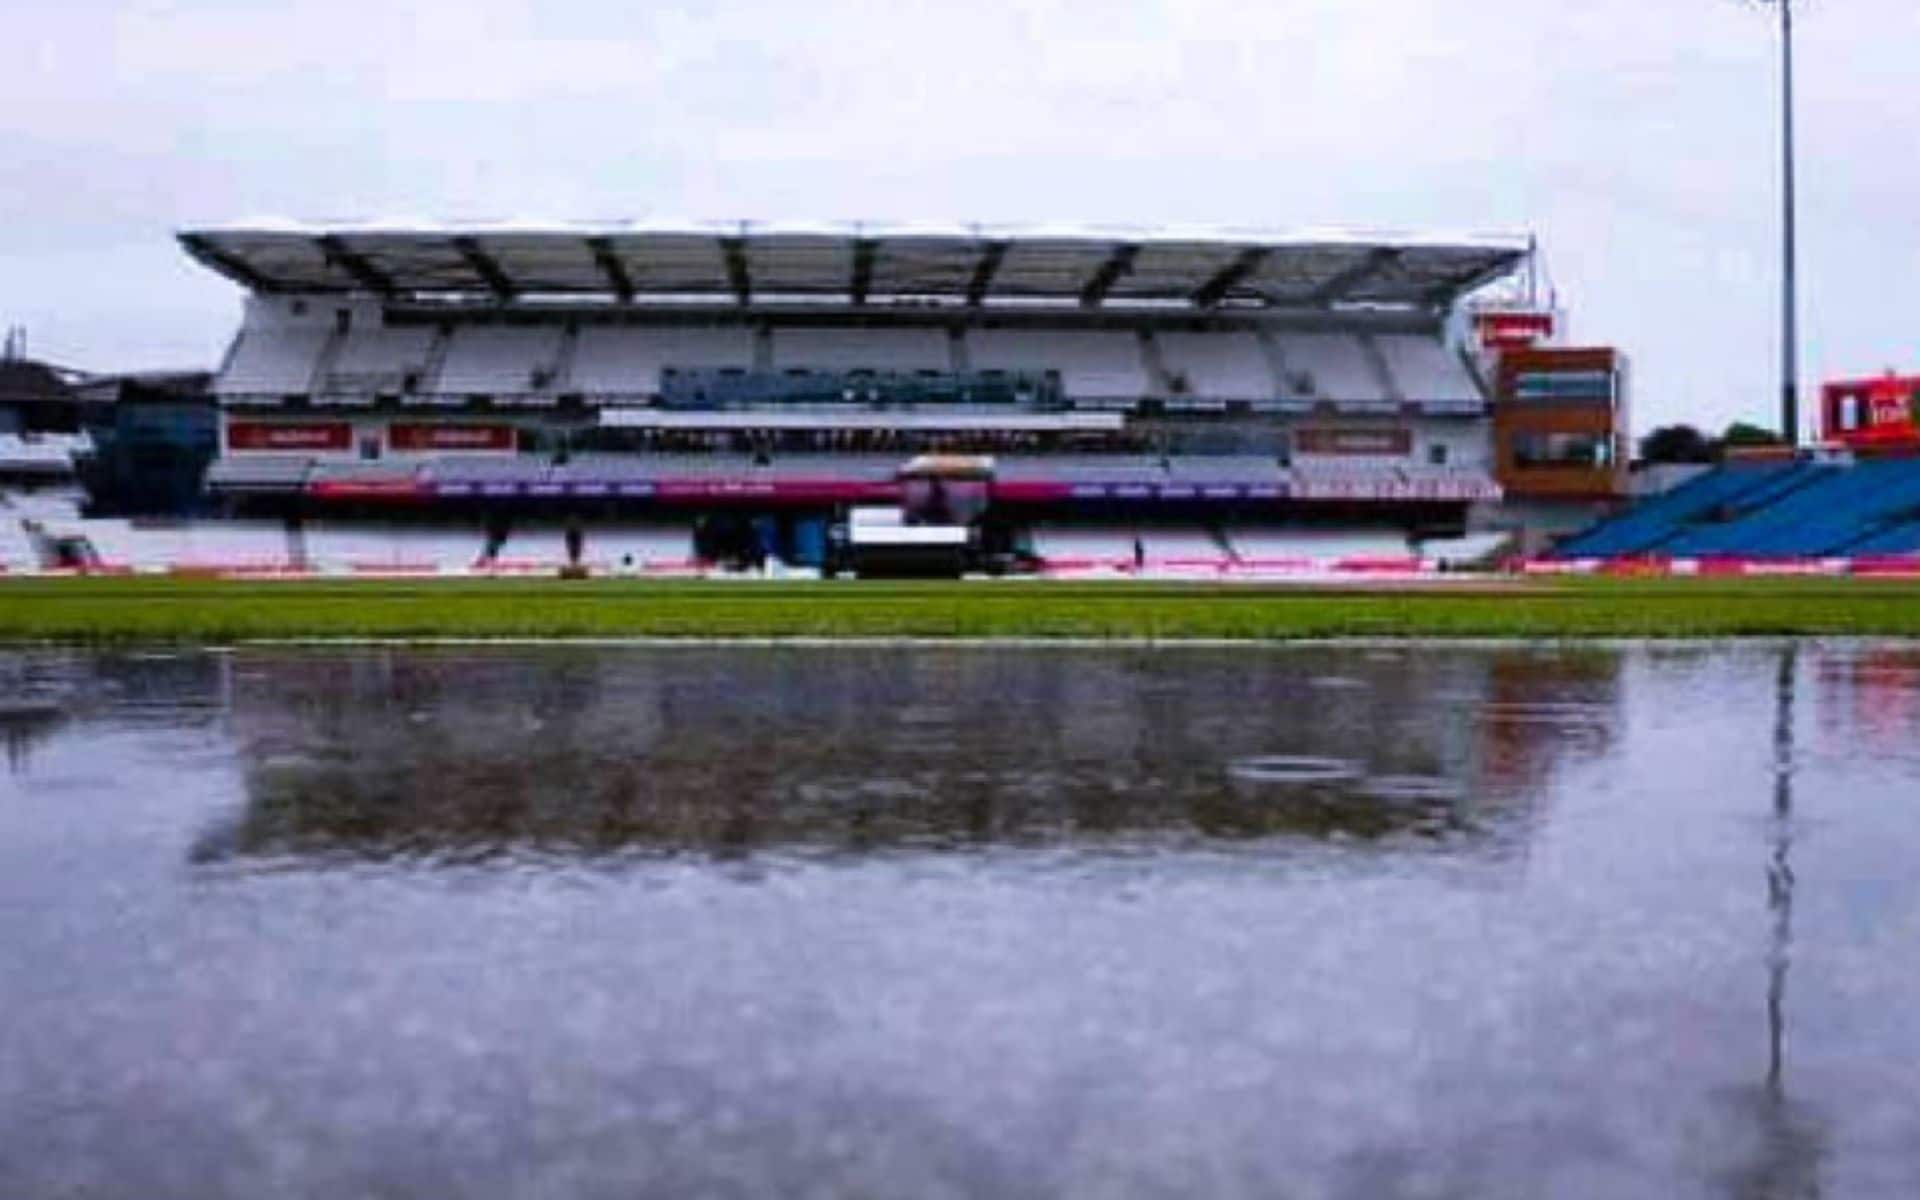 ENG Vs PAK 3rd T20I could be hampered by rain (x.com)